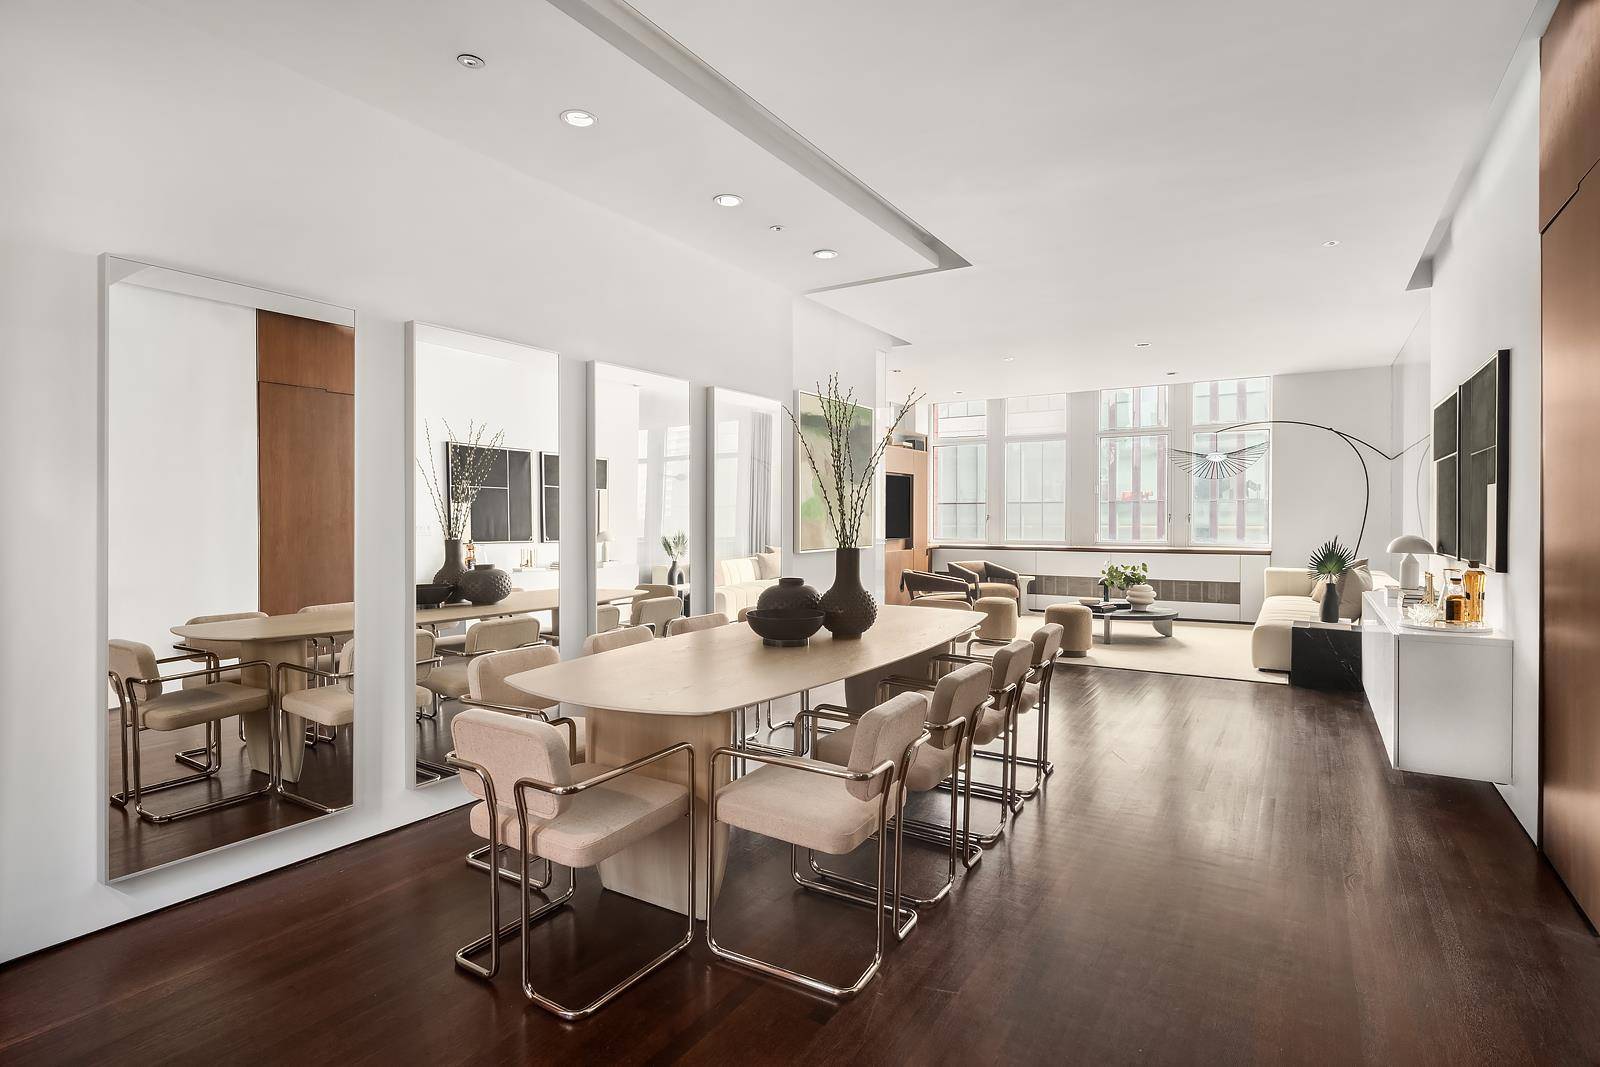 Welcome to residence 6A, a rarely available custom renovated split two bedroom in one of SoHo s premiere doorman condominiums on the edge of Greenwich Village.